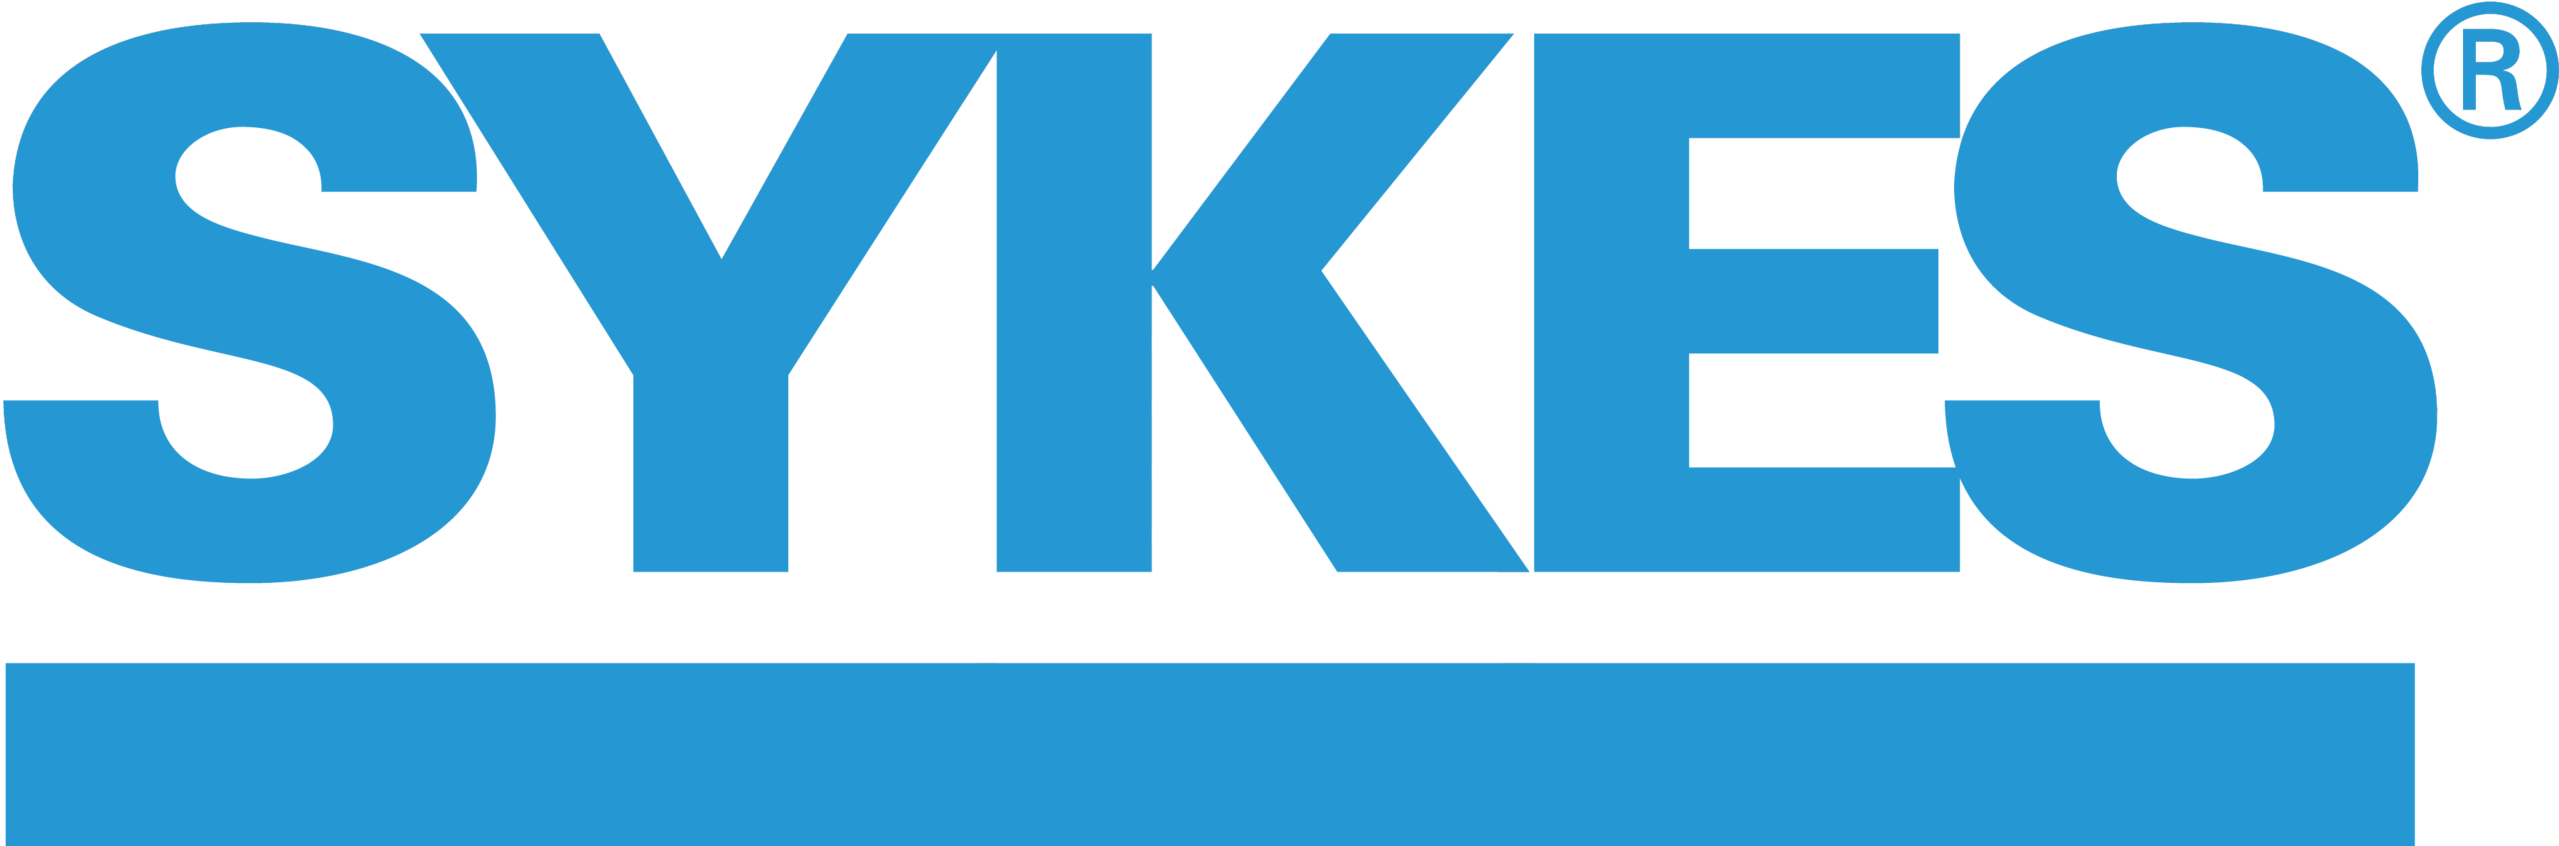 https://vcc.live/wp-content/uploads/2023/04/sykes-logo.png